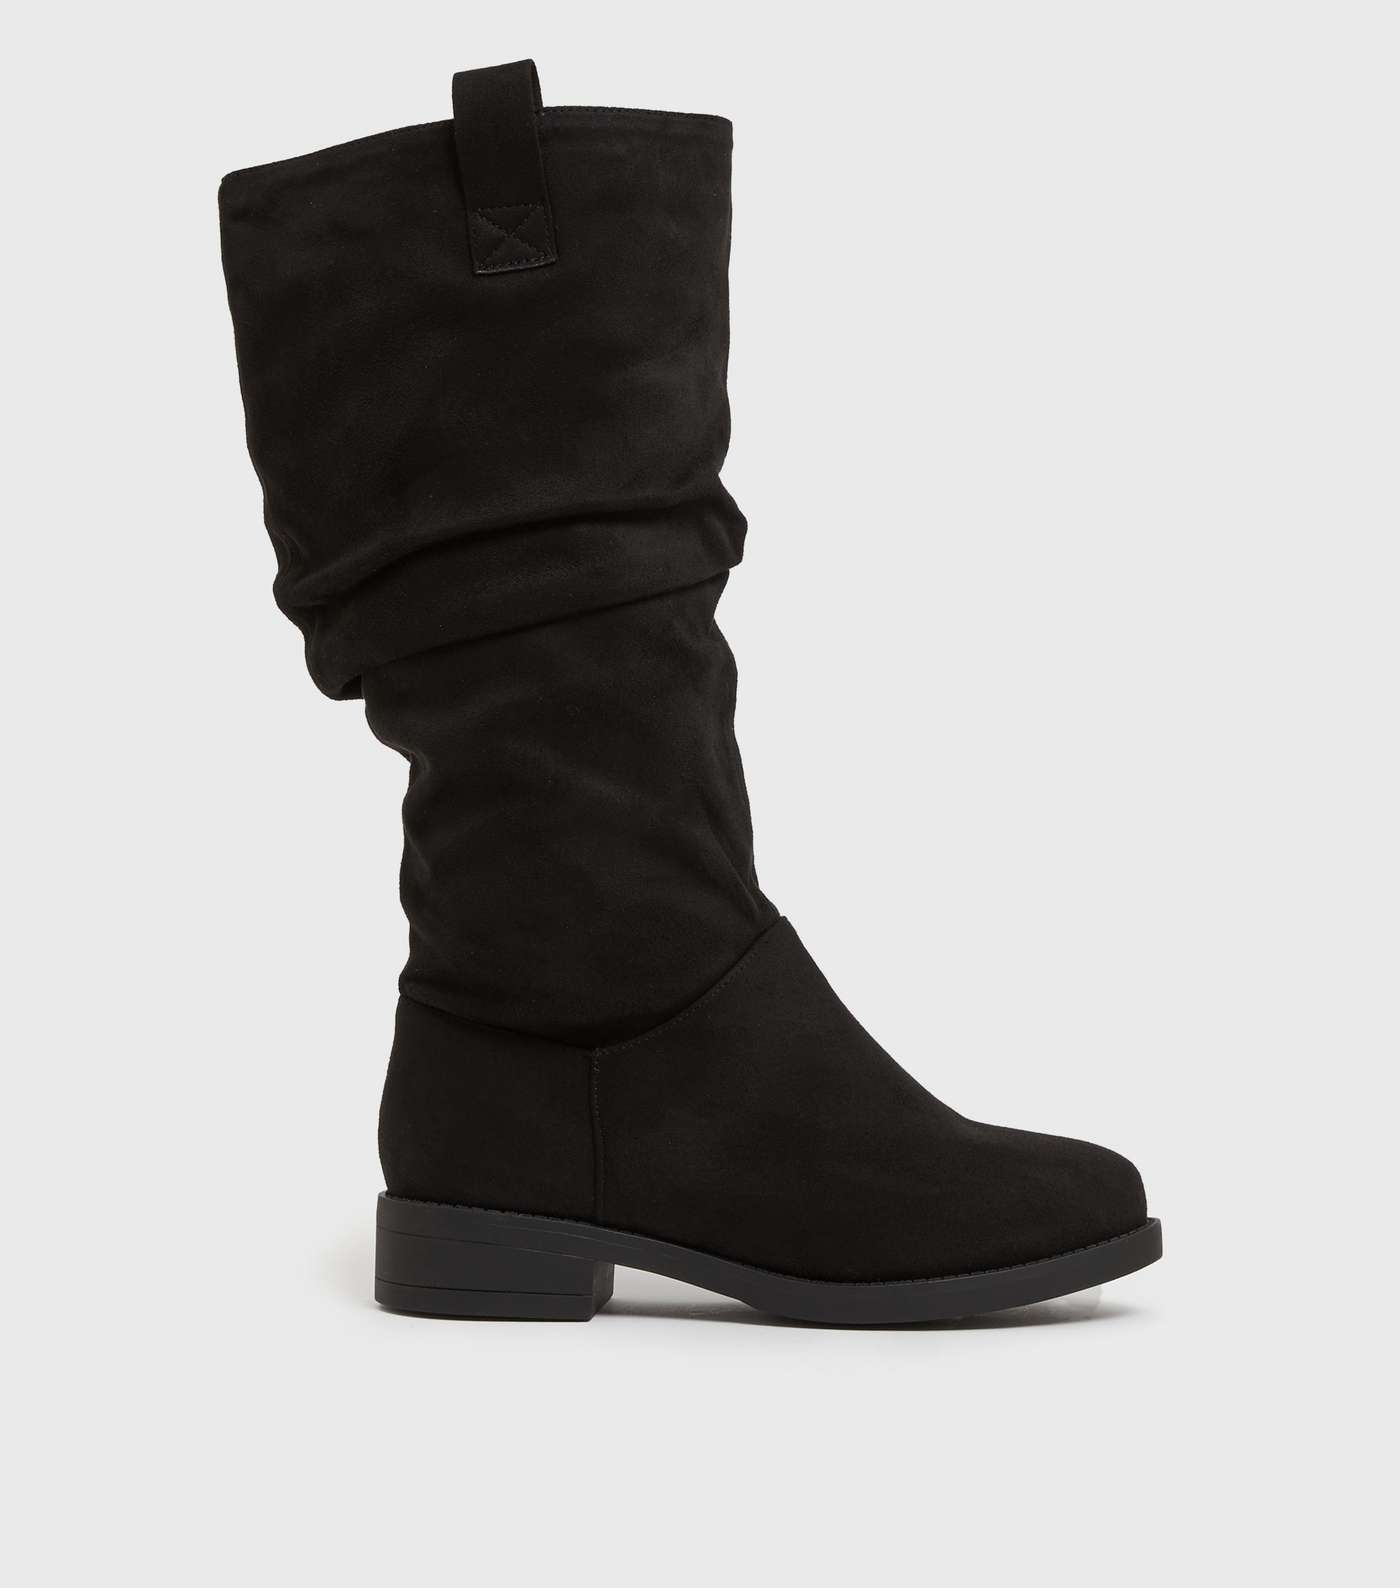 Extra Calf Fit Black Suedette Slouch Calf Boots